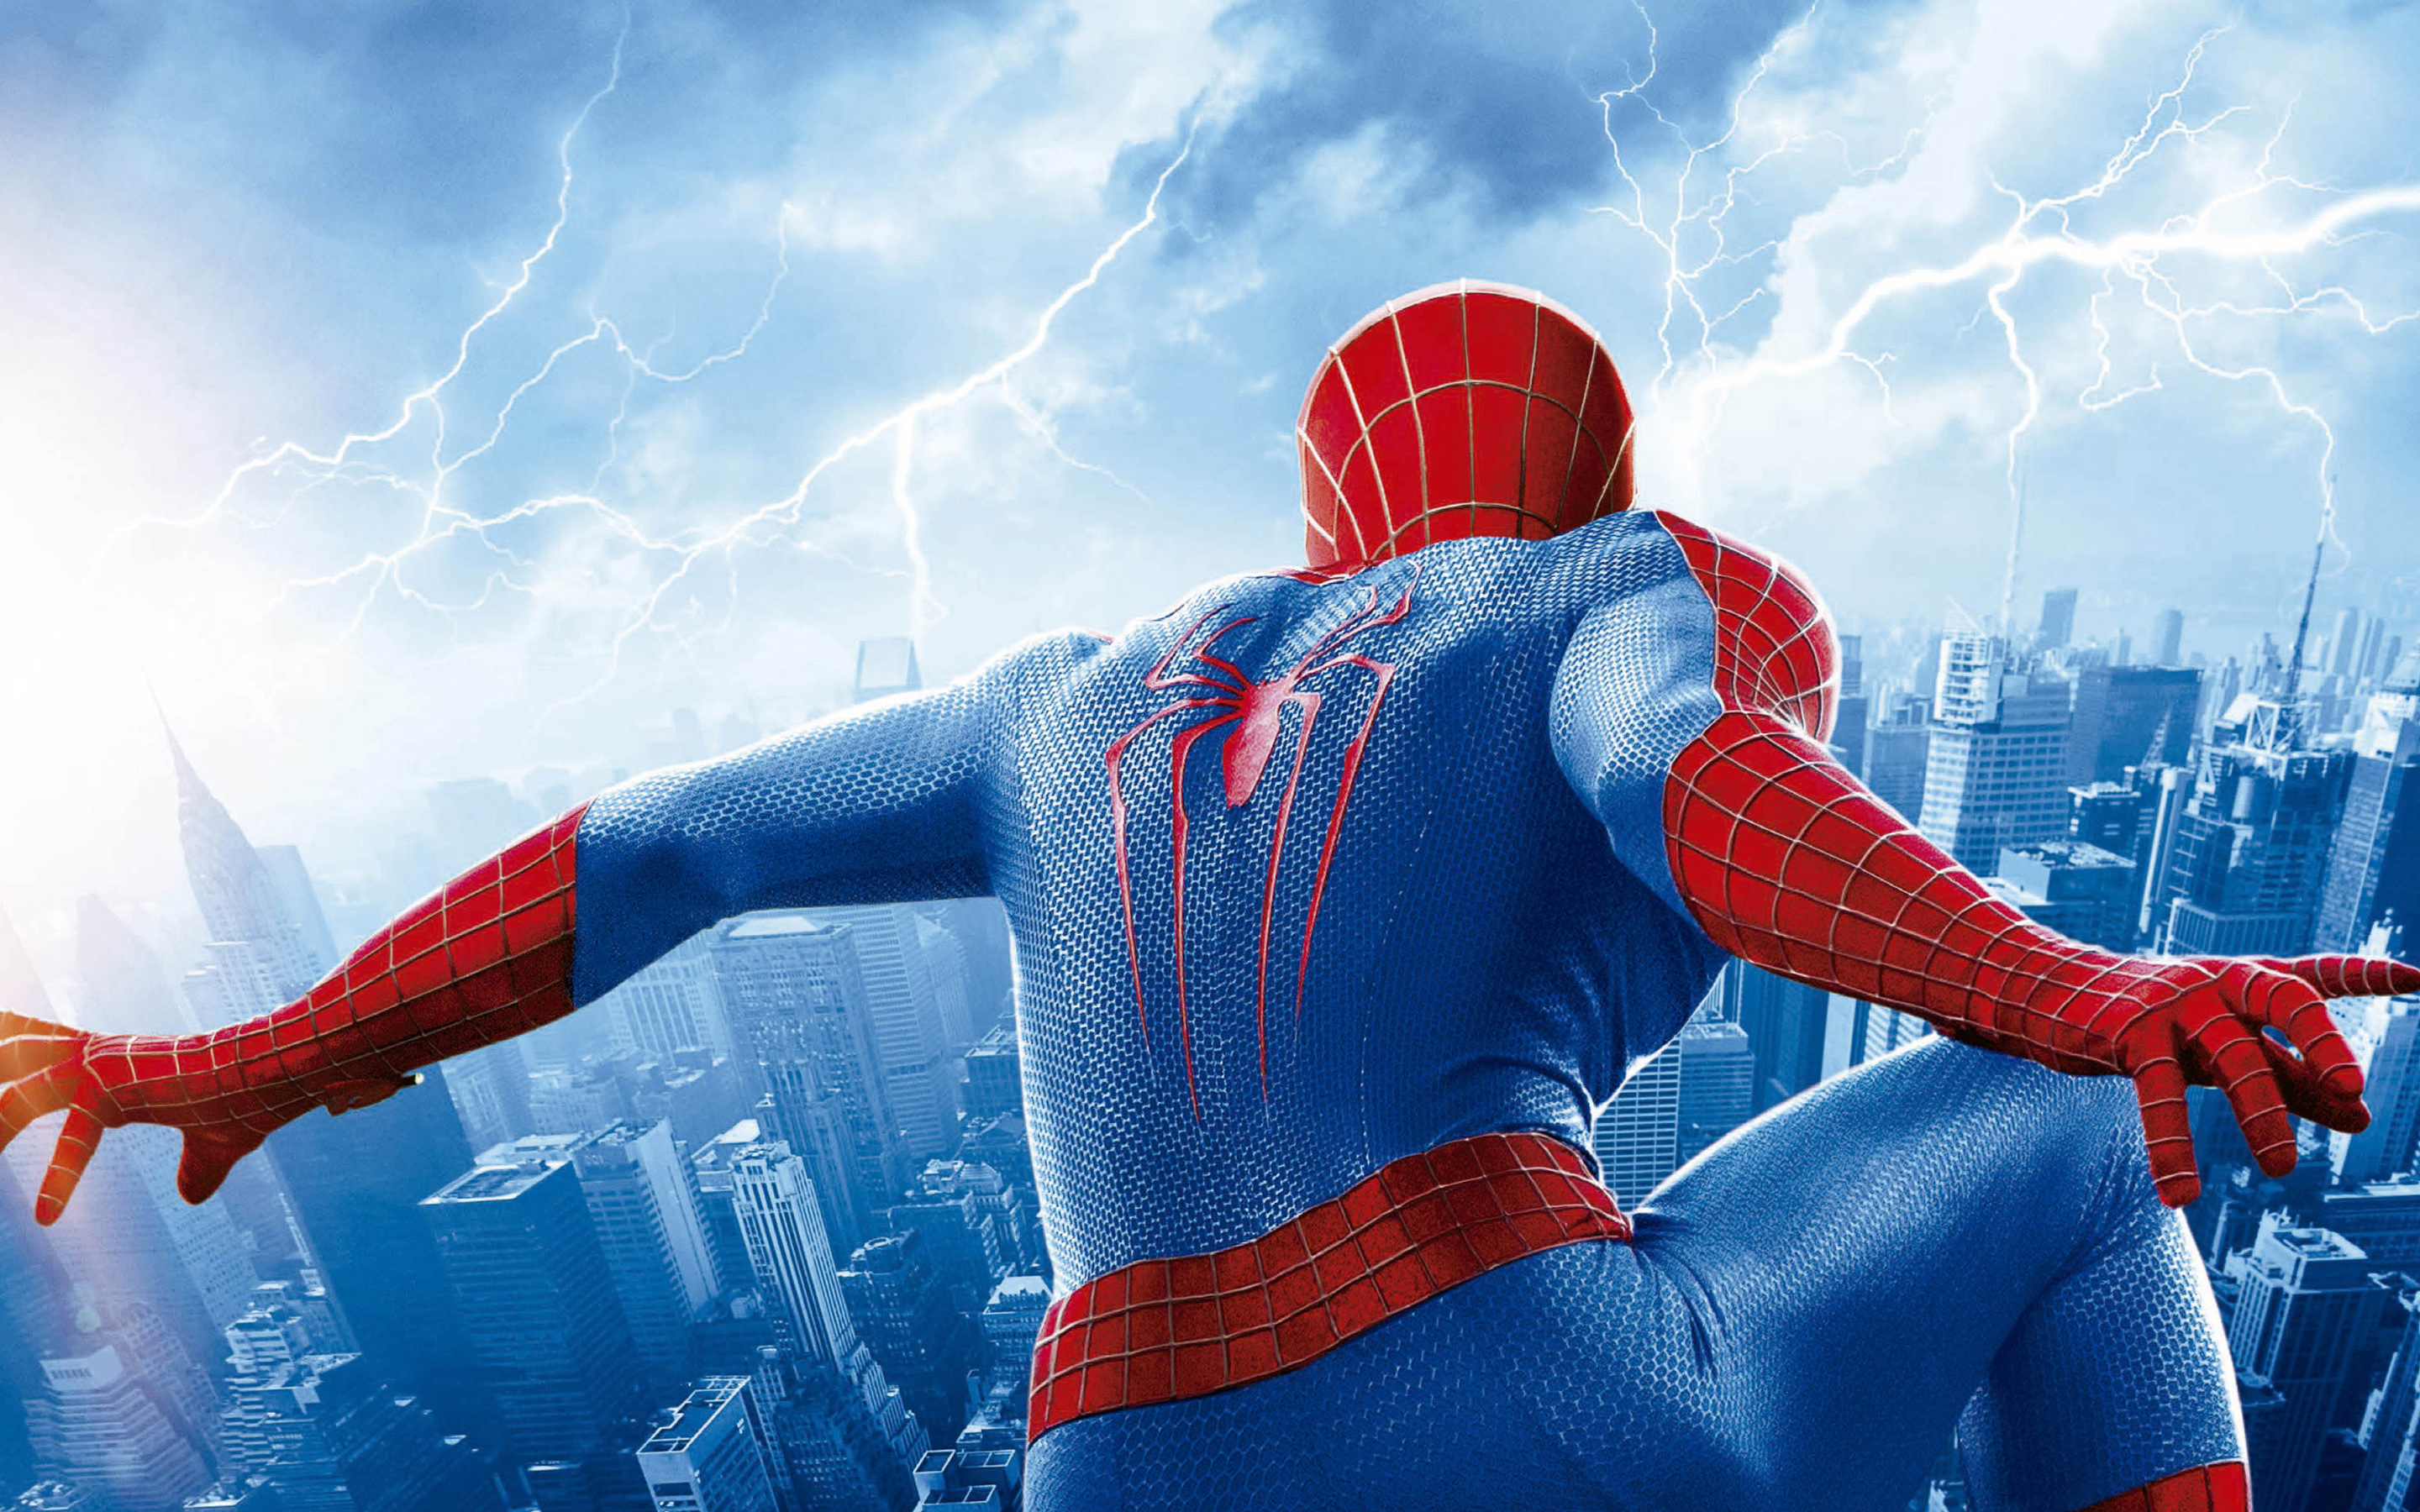 Spider man hd wallpapers